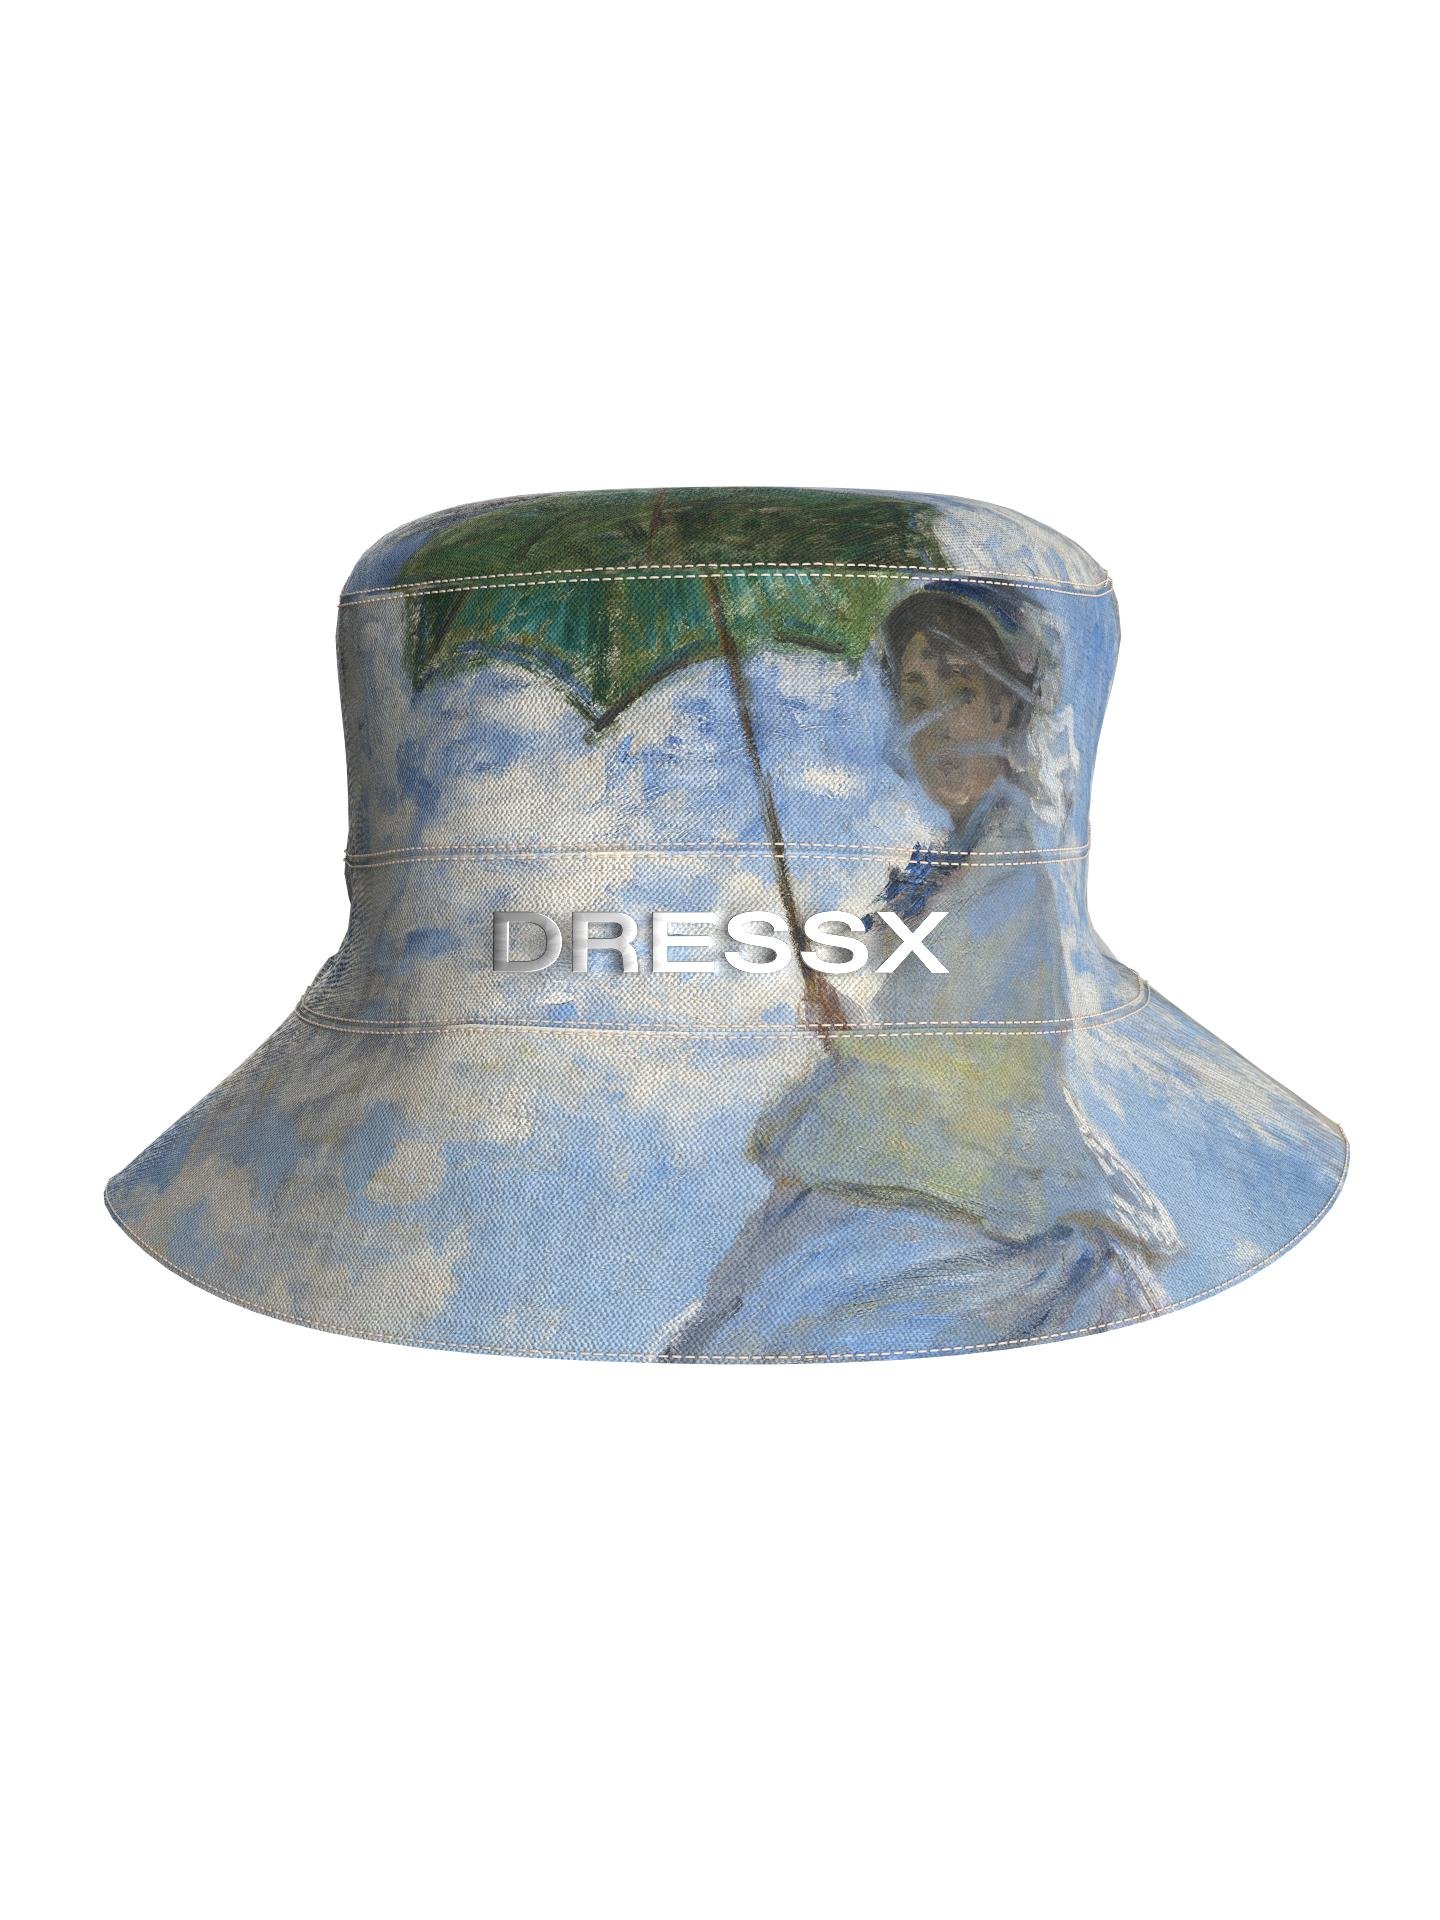 Bucket - Woman with a Parasol - Madame Monet and Her Son by DRESSX